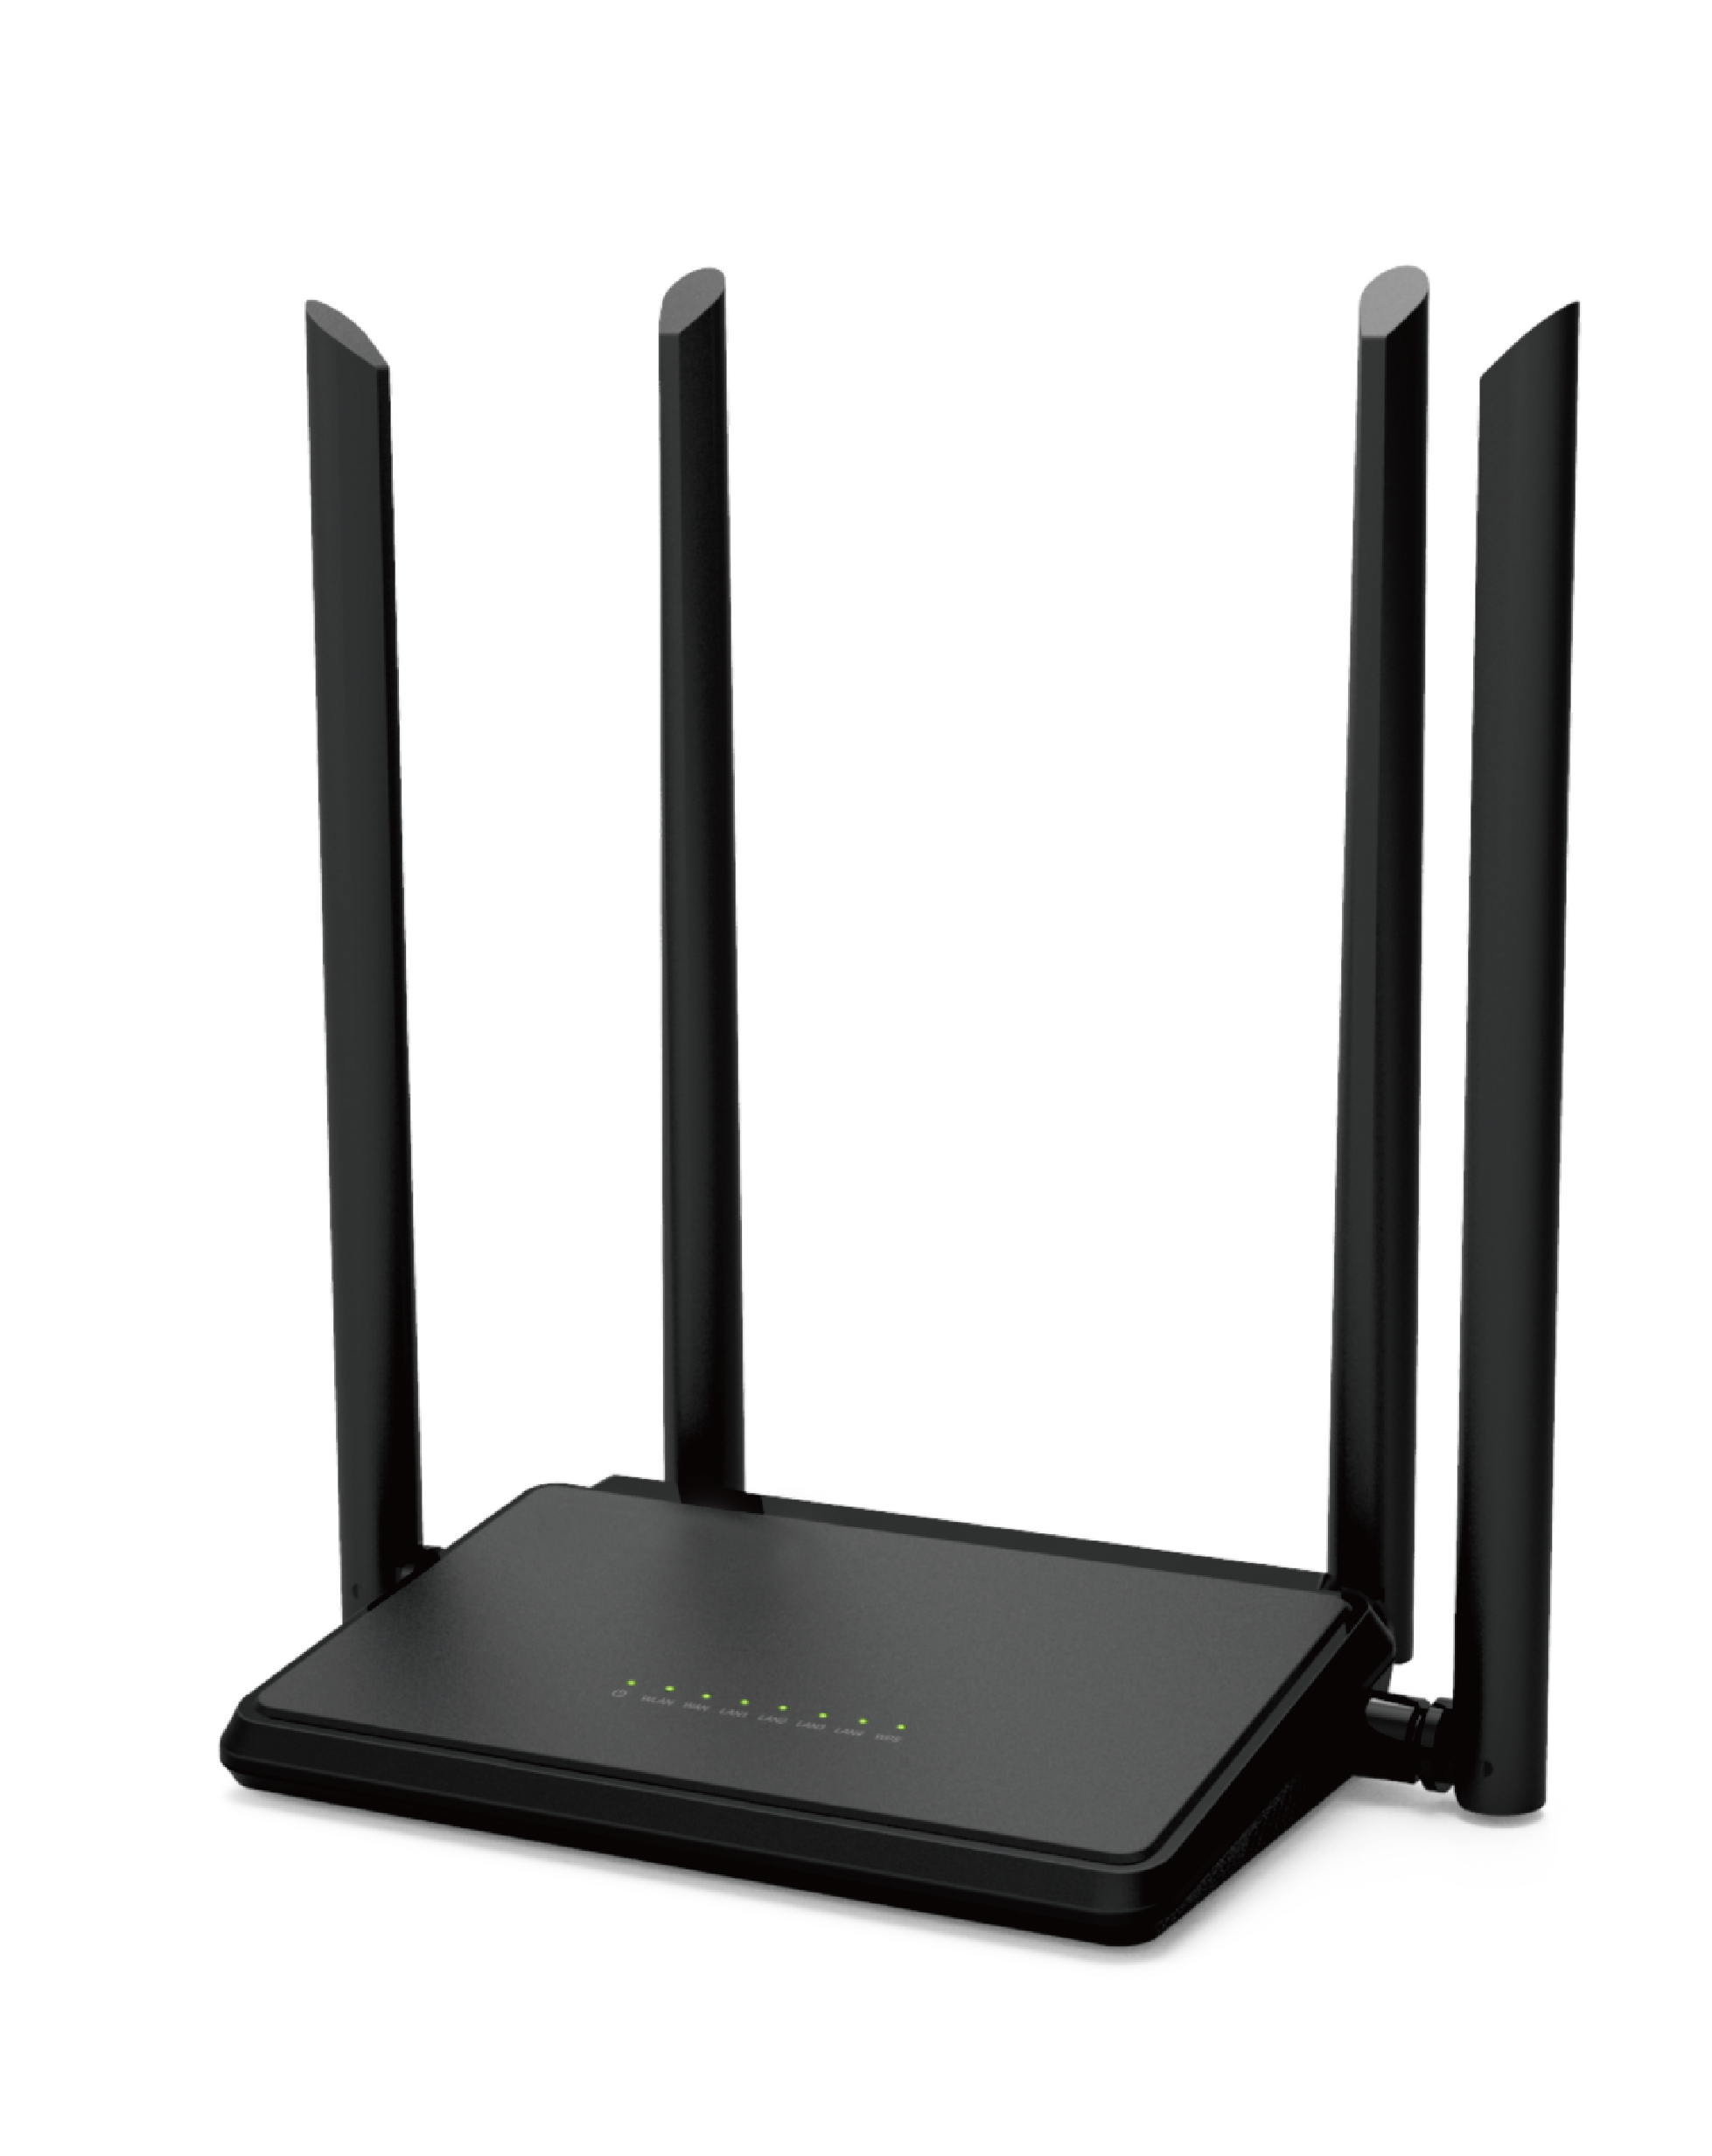 WRN304: 802.11n 300Mbps Wireless Router